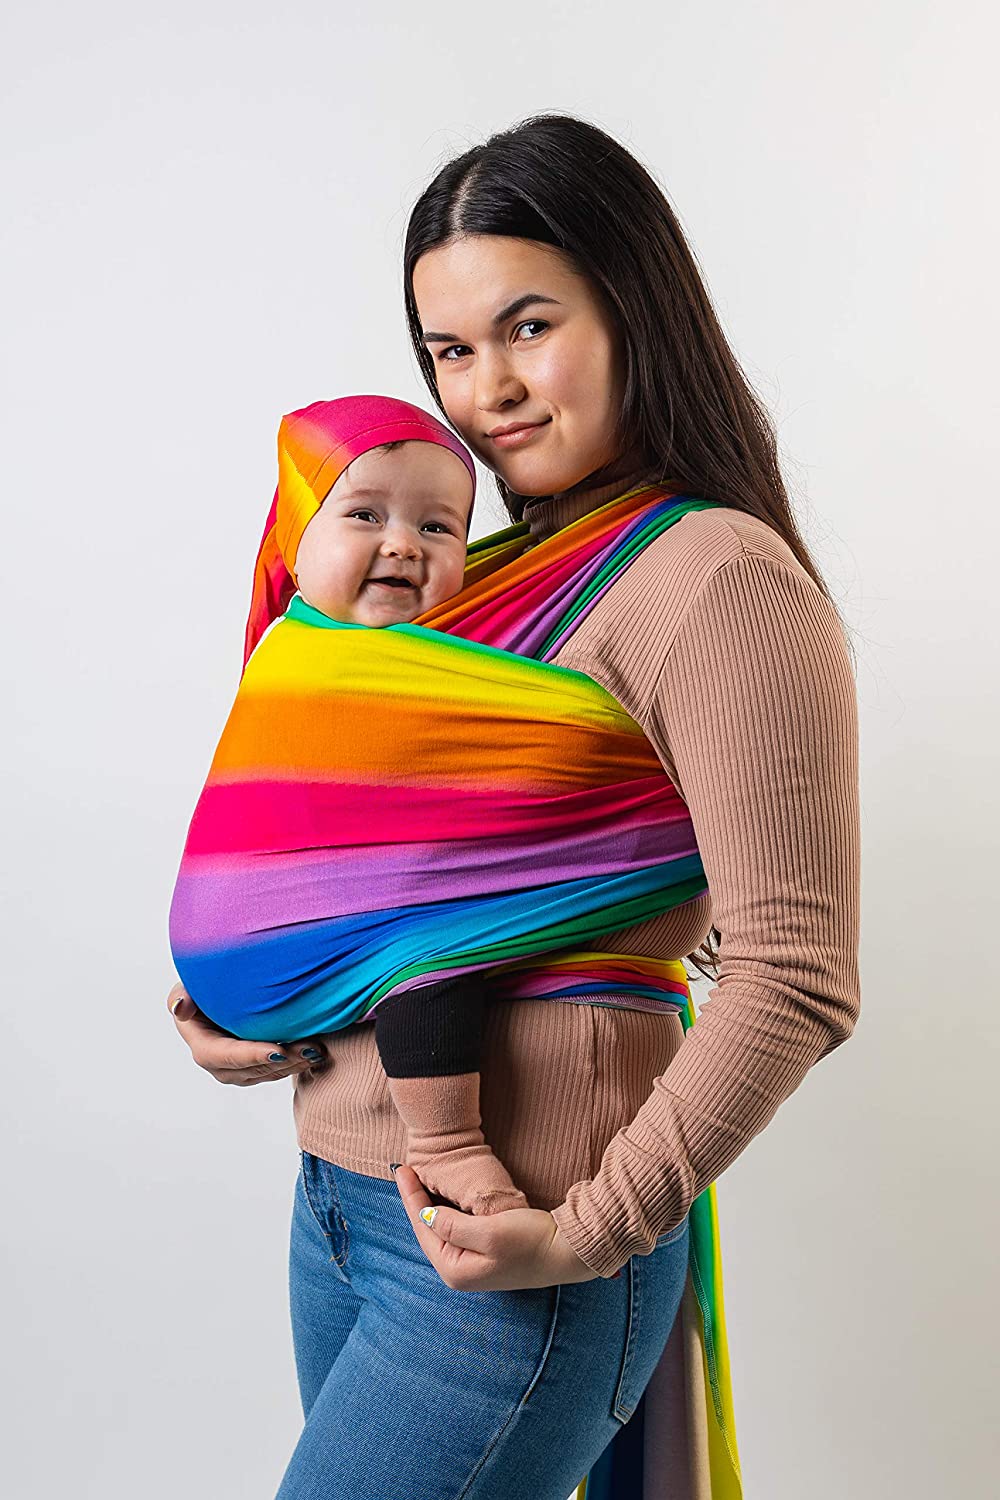 Organic Stretchy Baby Sling Carrier Premium Carrier Bag Tested in the UK/EU, Made in the UK by Joy and Joe, Suitable from Birth to 16kg, Includes Hat, Bag and Full Colour Instructions (Rainbow Colours)